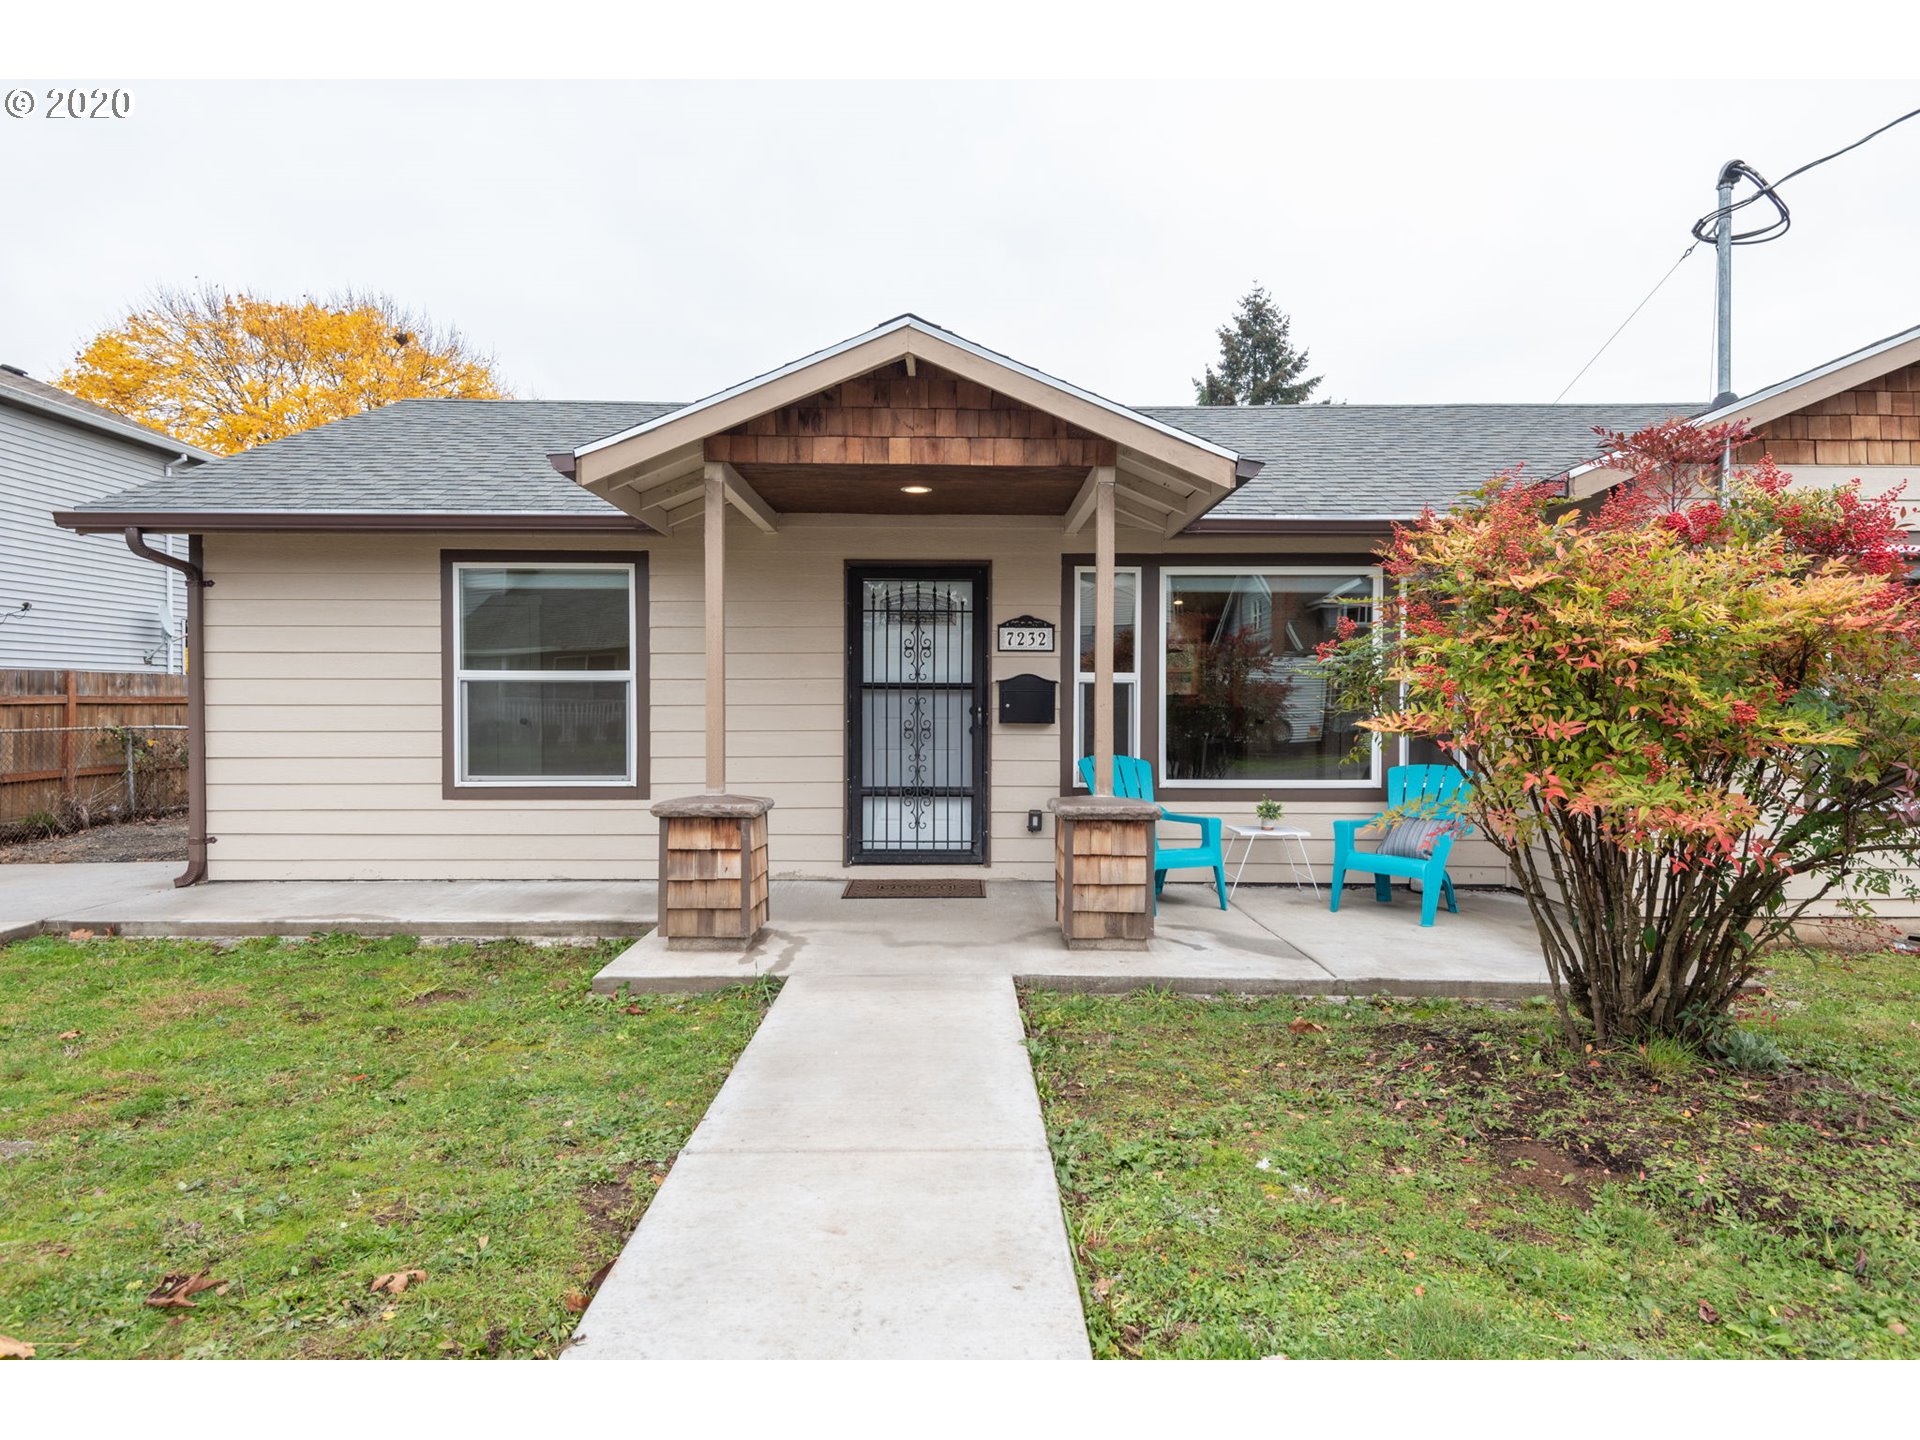 7232 SE 69TH AVE (1 of 31)